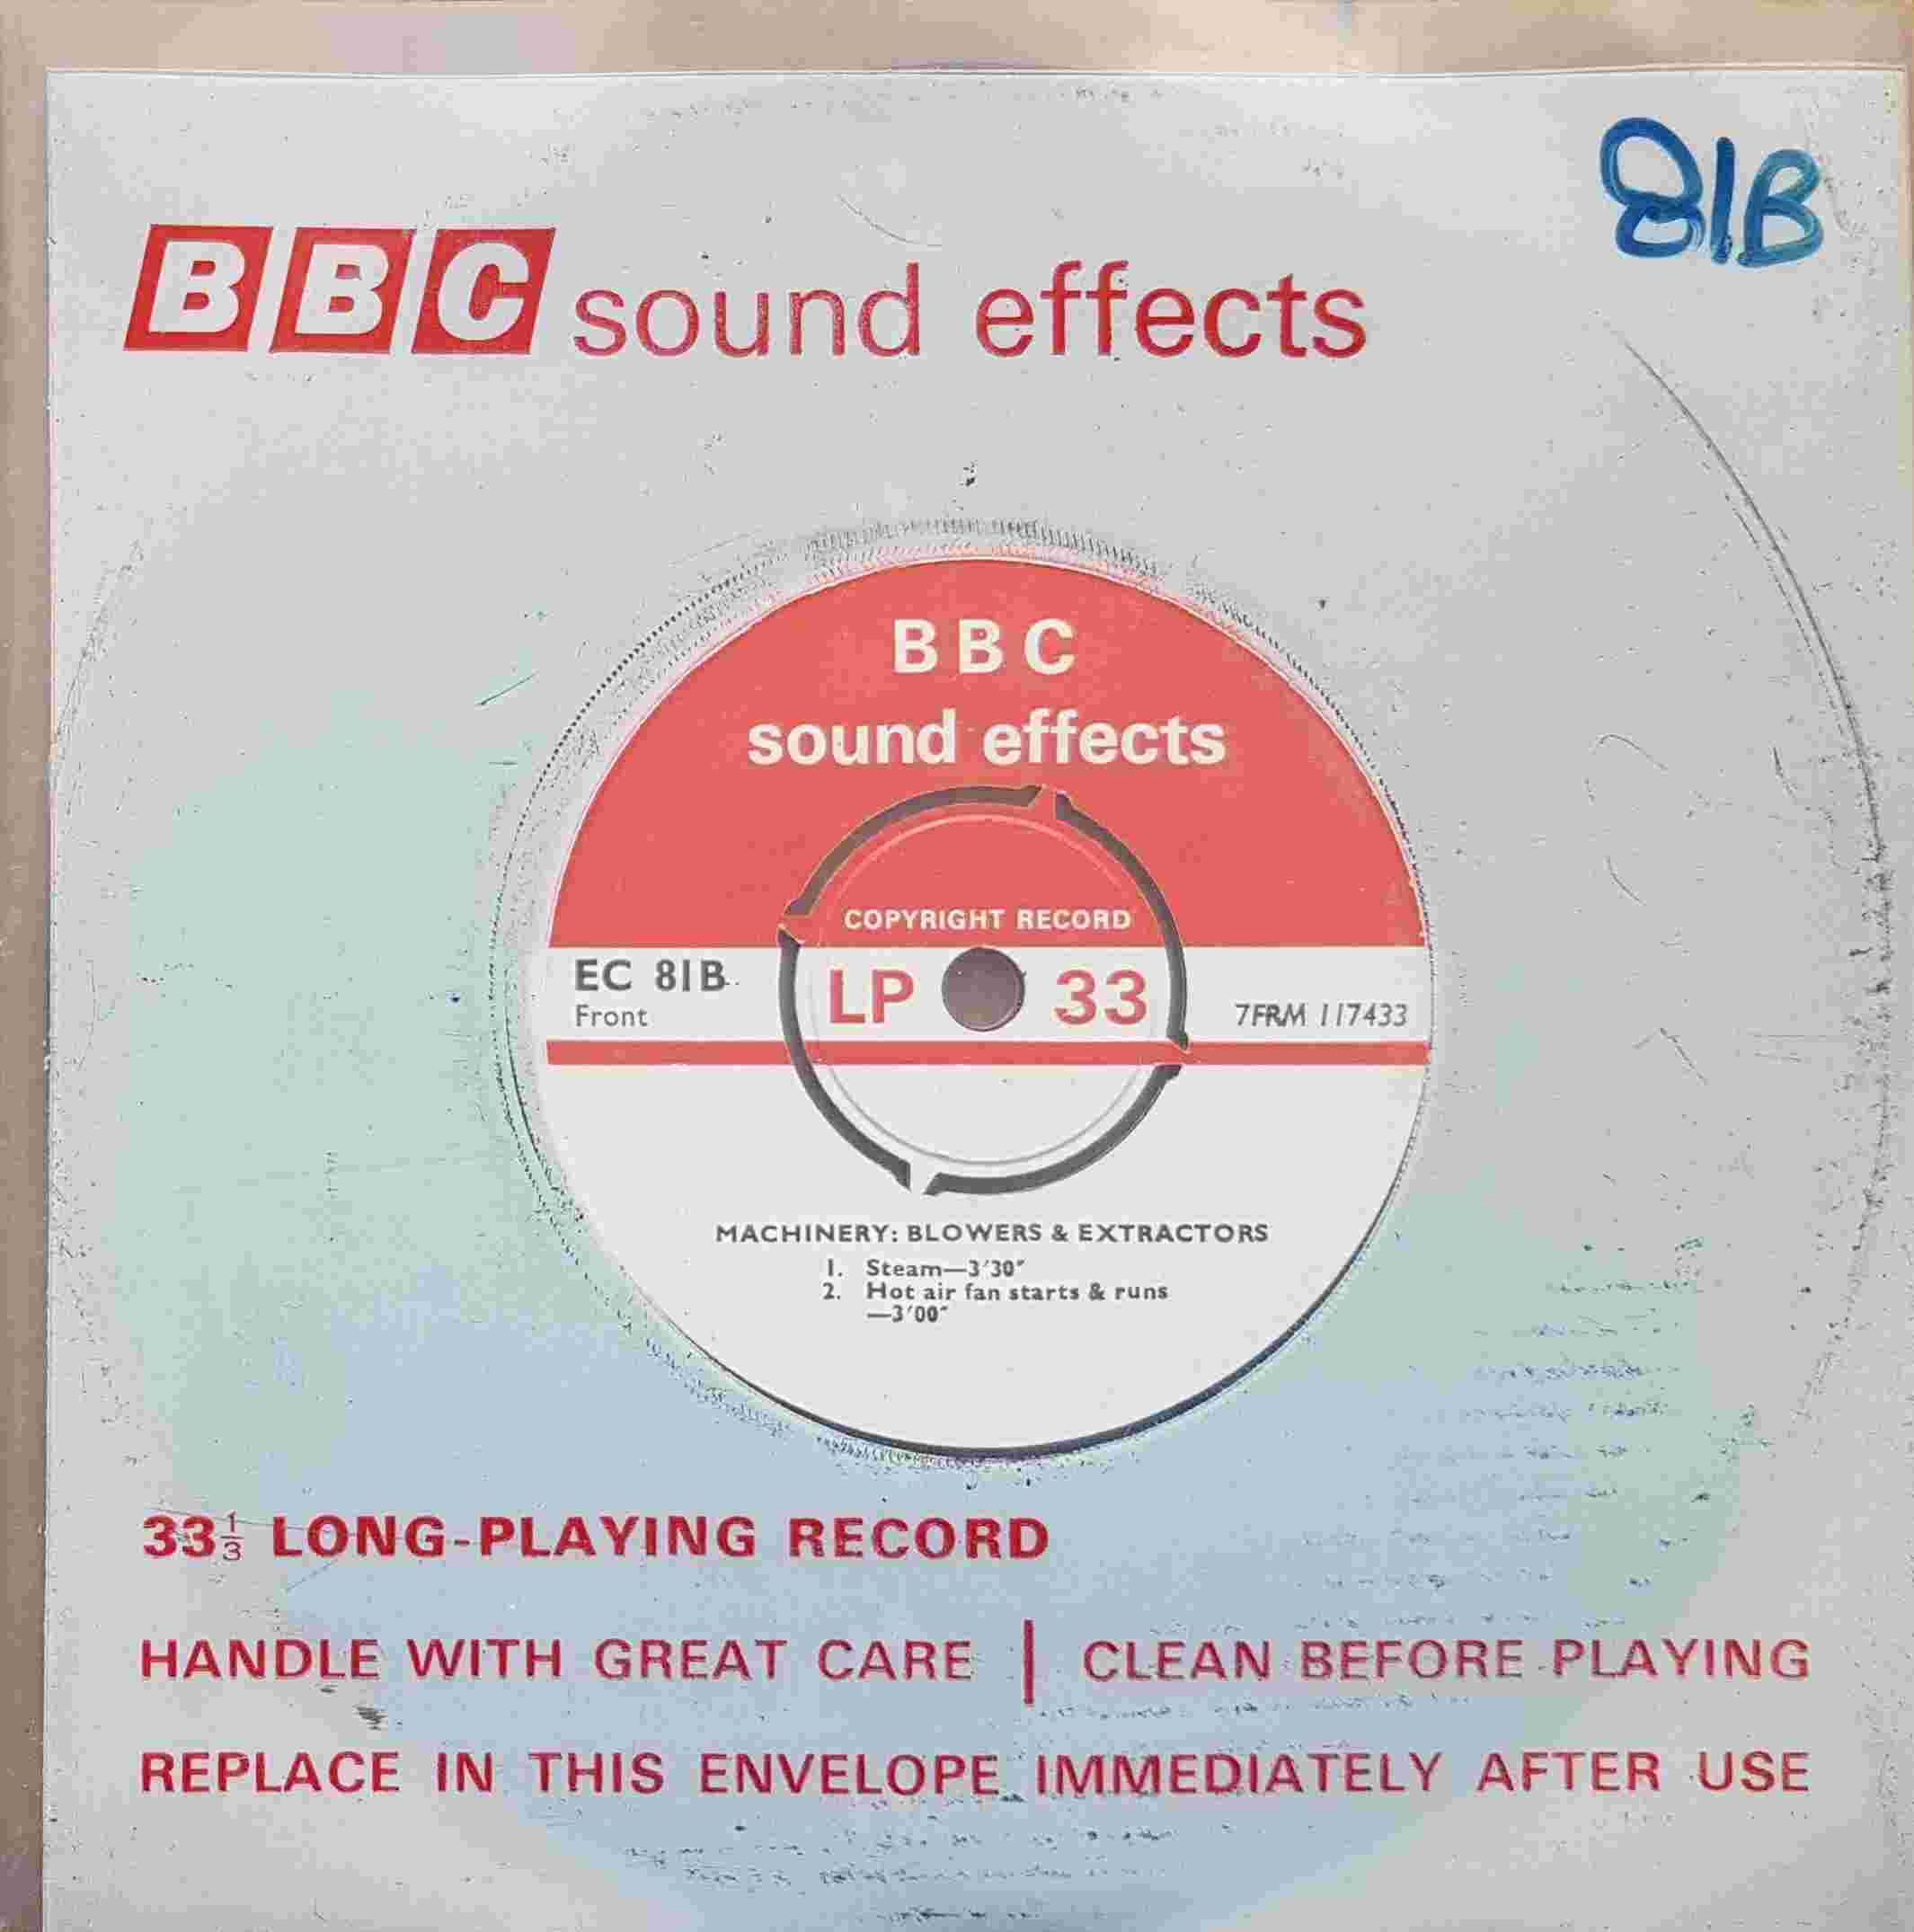 Picture of EC 81B Machinery: Blowers & extractors by artist Not registered from the BBC singles - Records and Tapes library